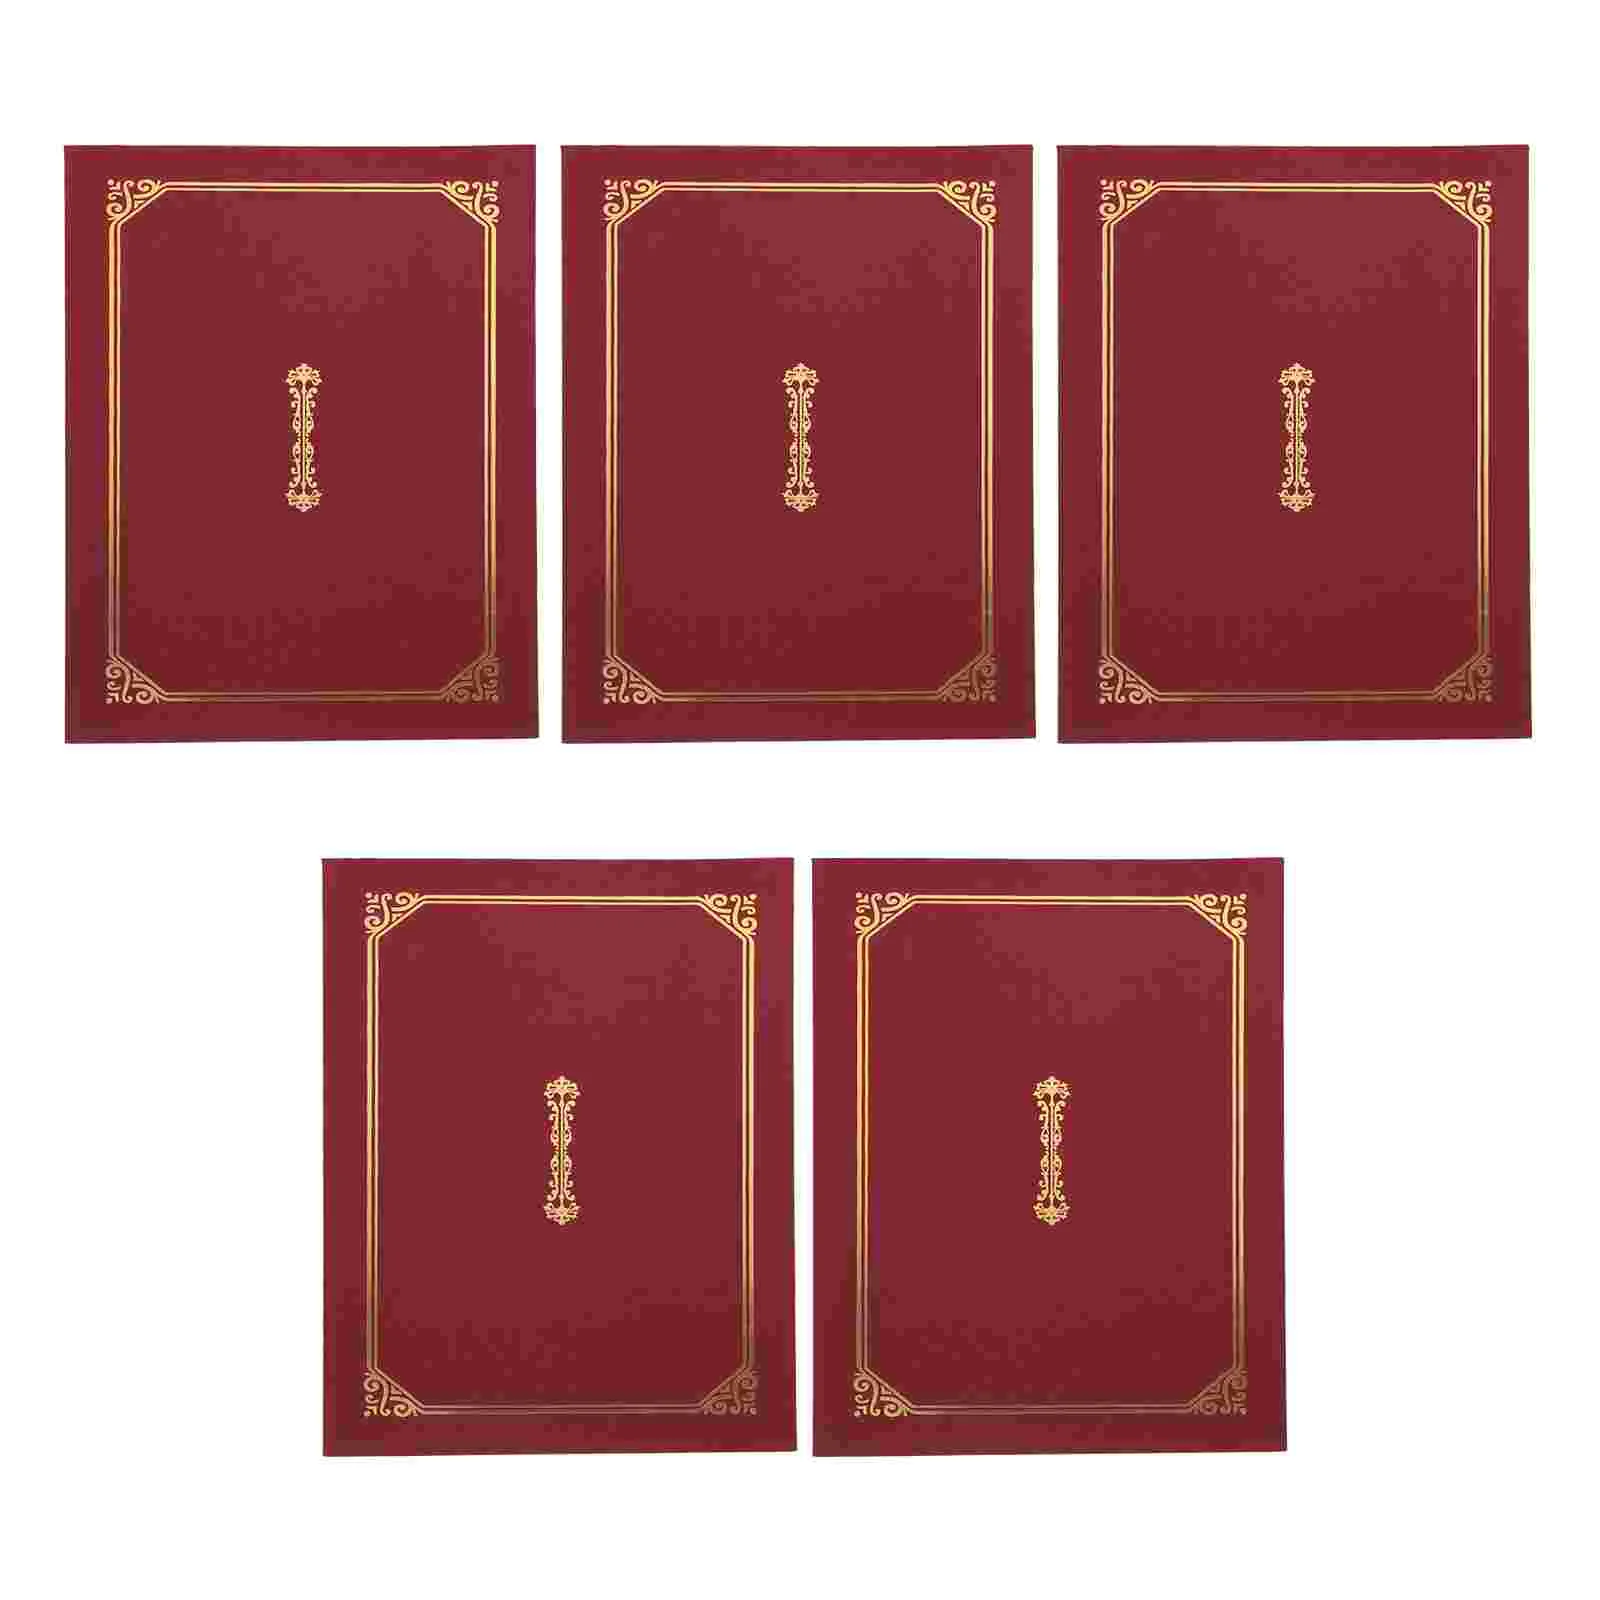 

5 Pcs Blue Folder Honor Certificate Cover Protective Covers ID Diploma Paper A4 Holder Shells Staff Archive Archivist